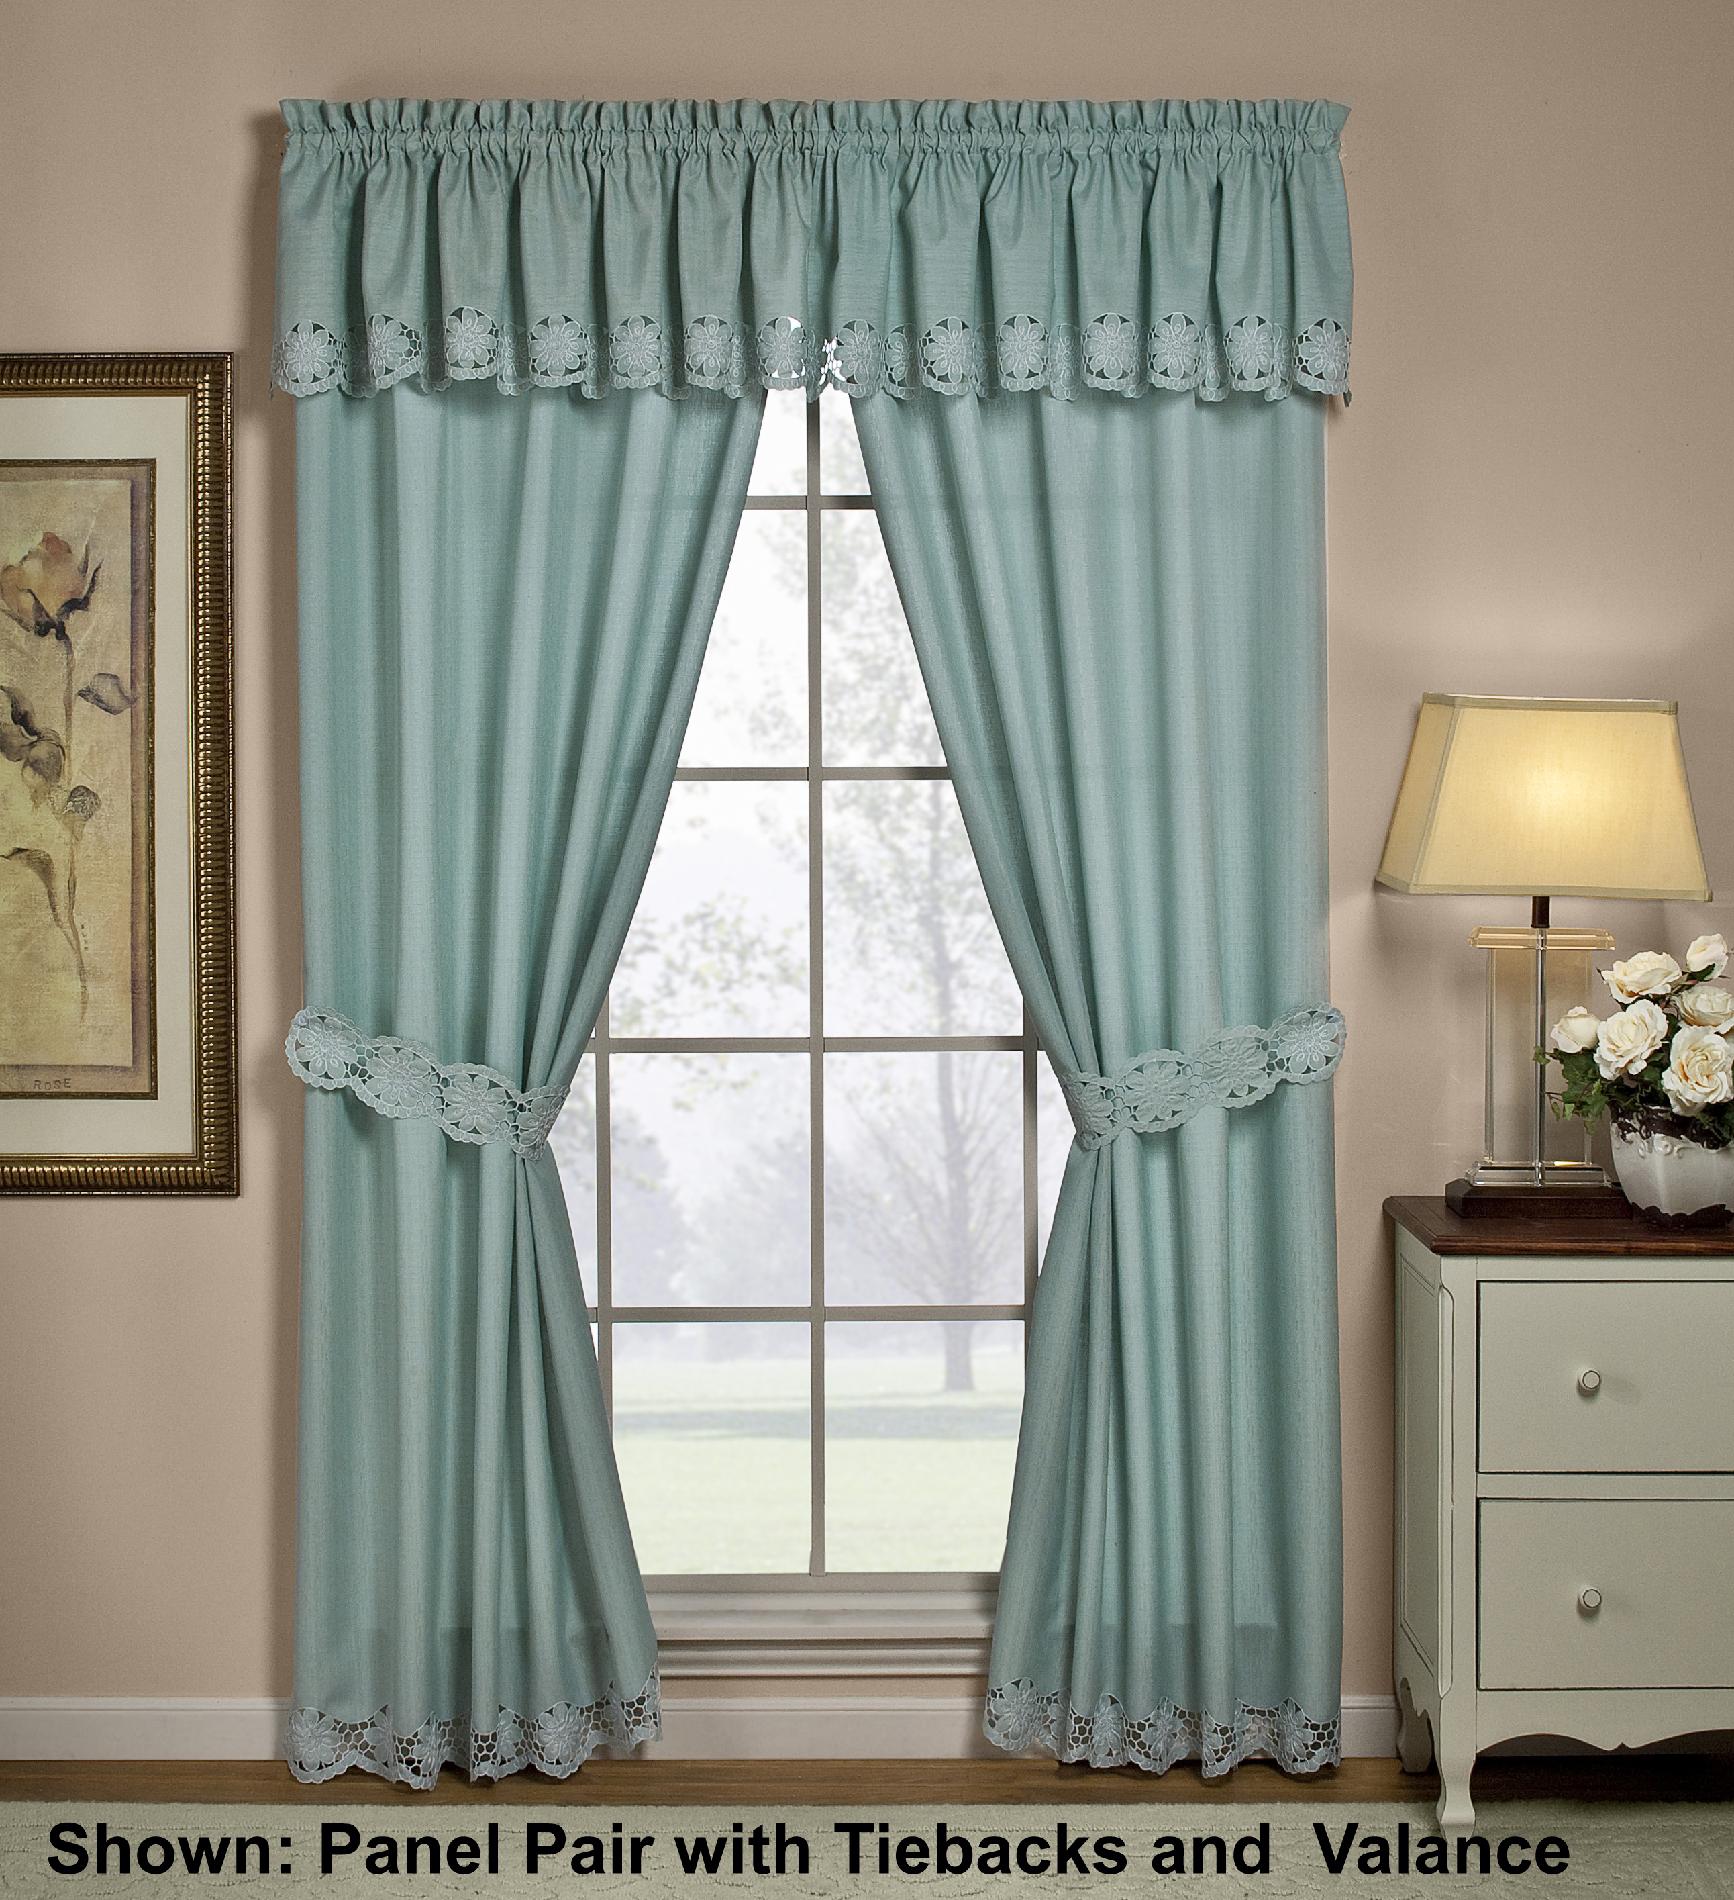 Today's Curtain Taylor 14" Valance